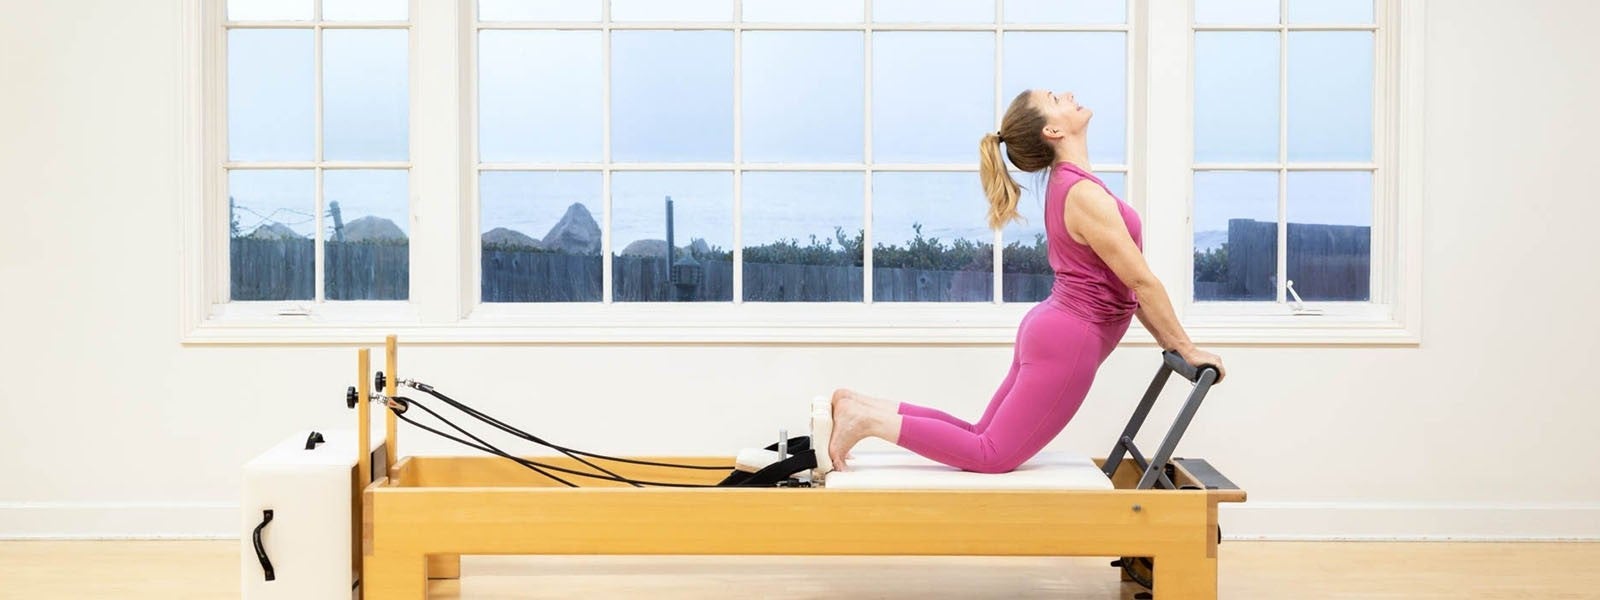 Mat Versus Reformer Pilates: What's the Difference? - Reform Studios, Pilates, Reformer & Mat Pilates